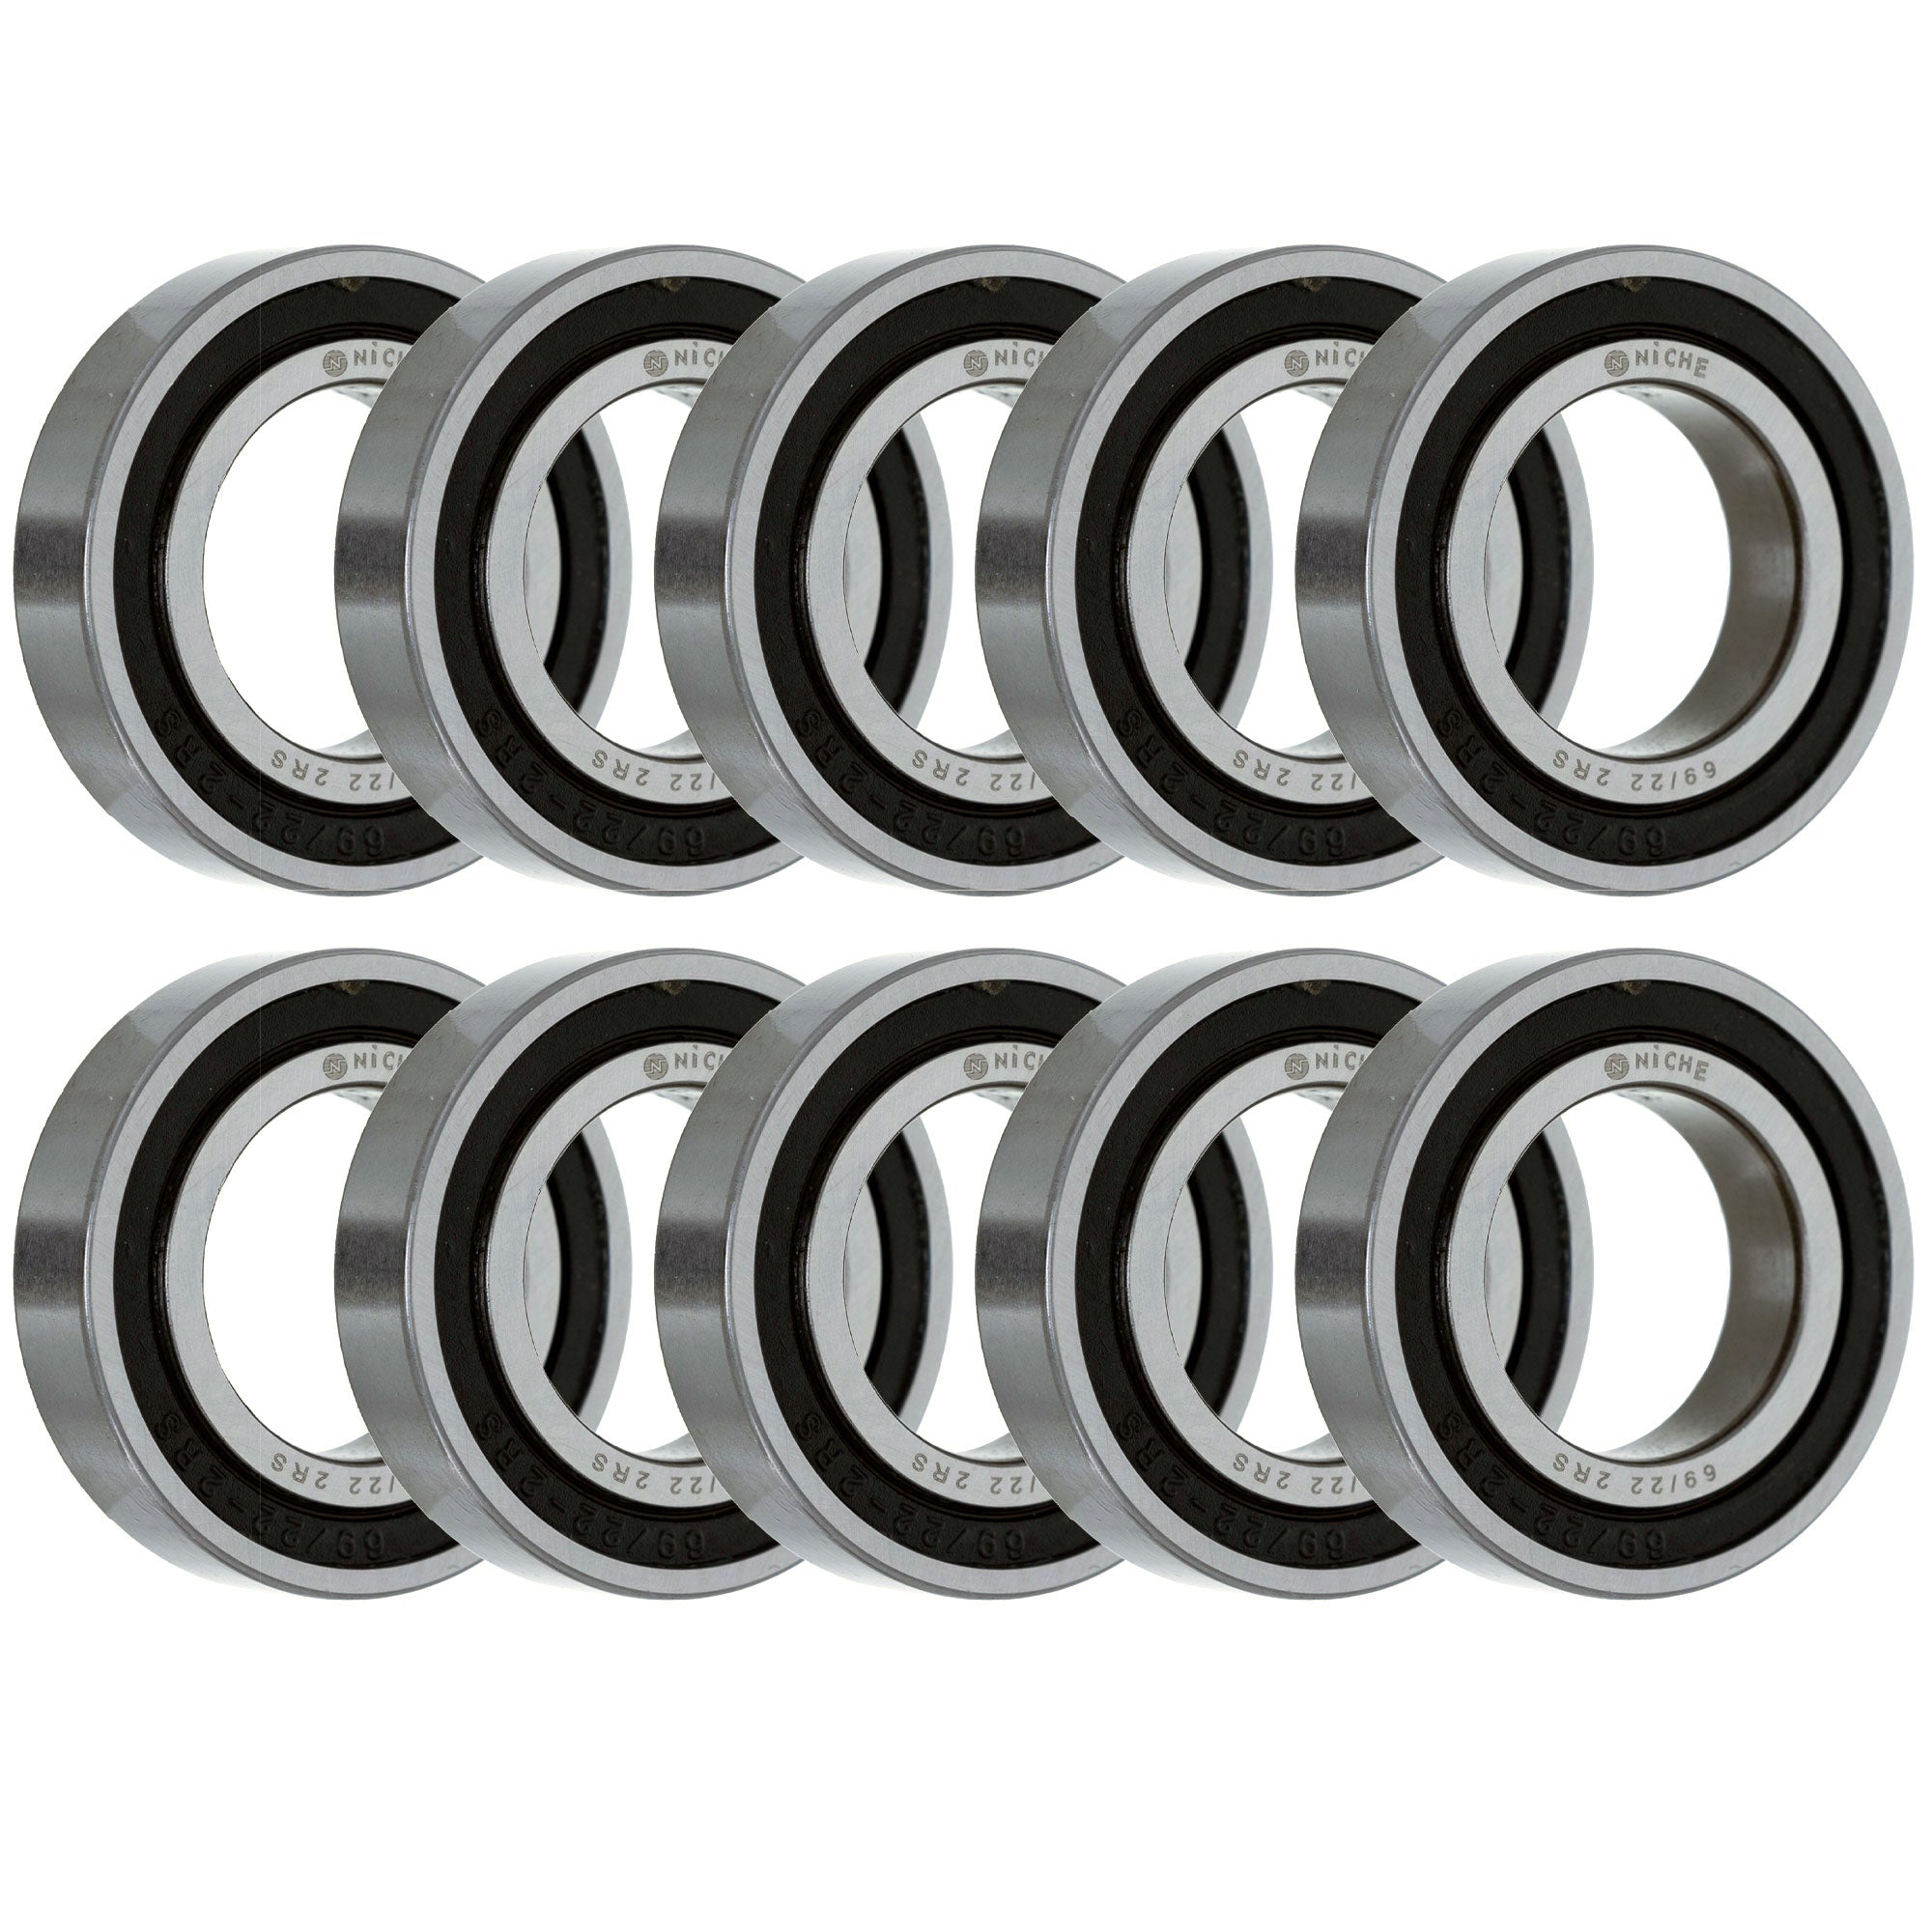 Single Row, Deep Groove, Ball Bearing Pack of 10 10-Pack for zOTHER YZ450FX YZ450F YZ250FX NICHE 519-CBB2201R